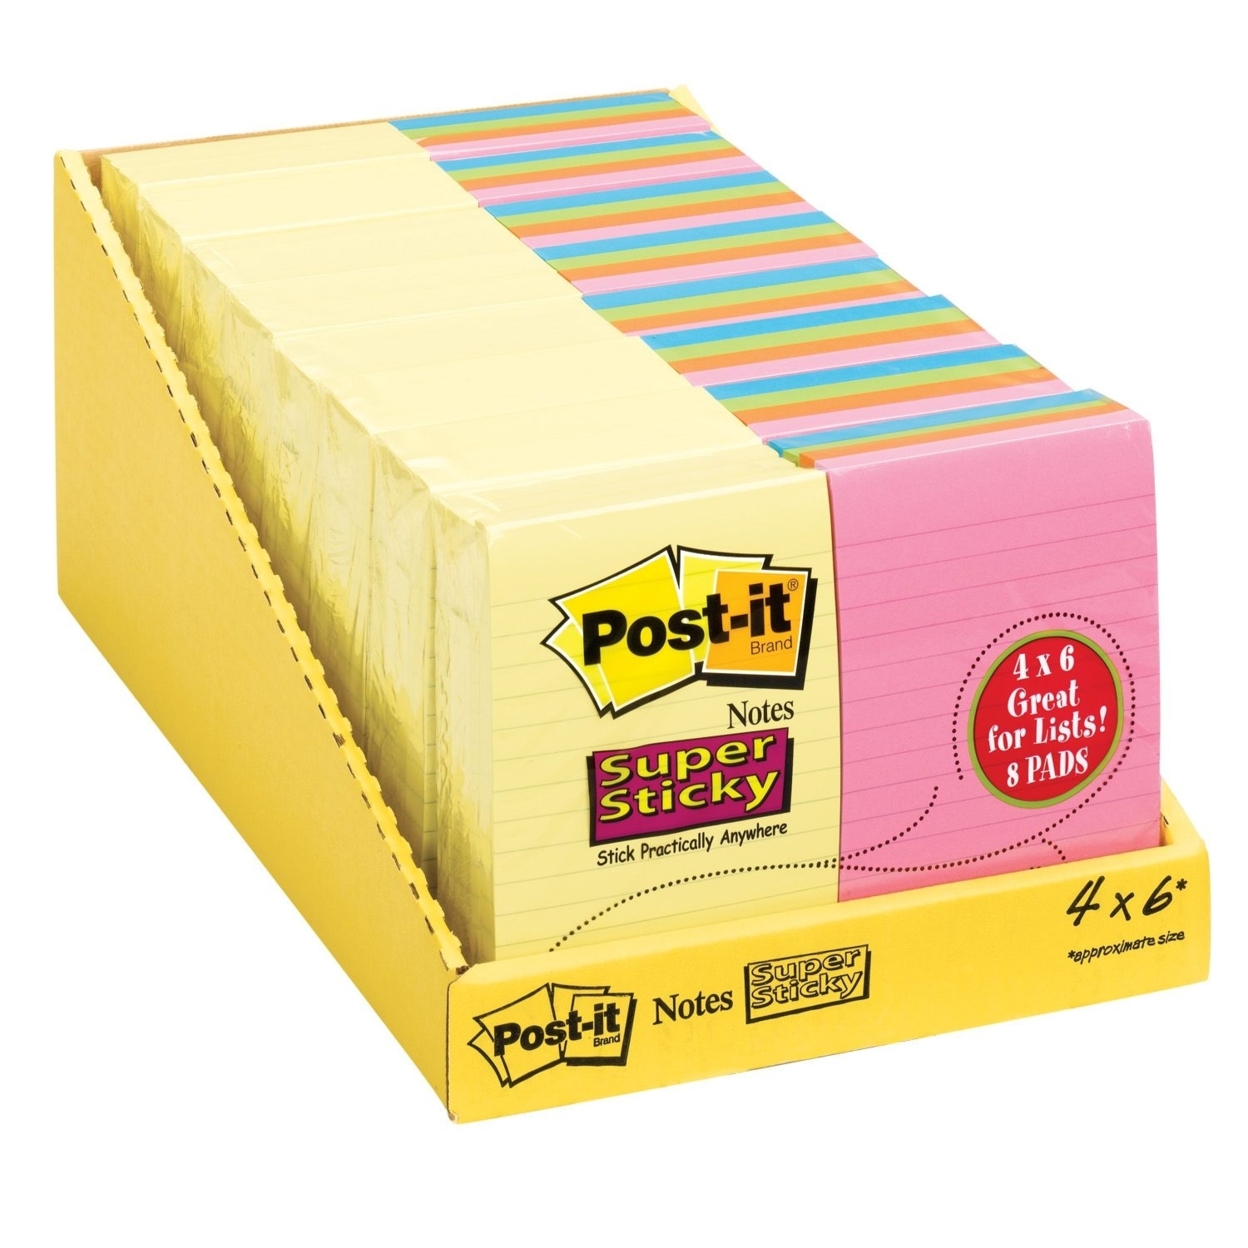 Post-it Super Sticky Notes, 4 X 6, 8 Pads, 800 Total Sheets